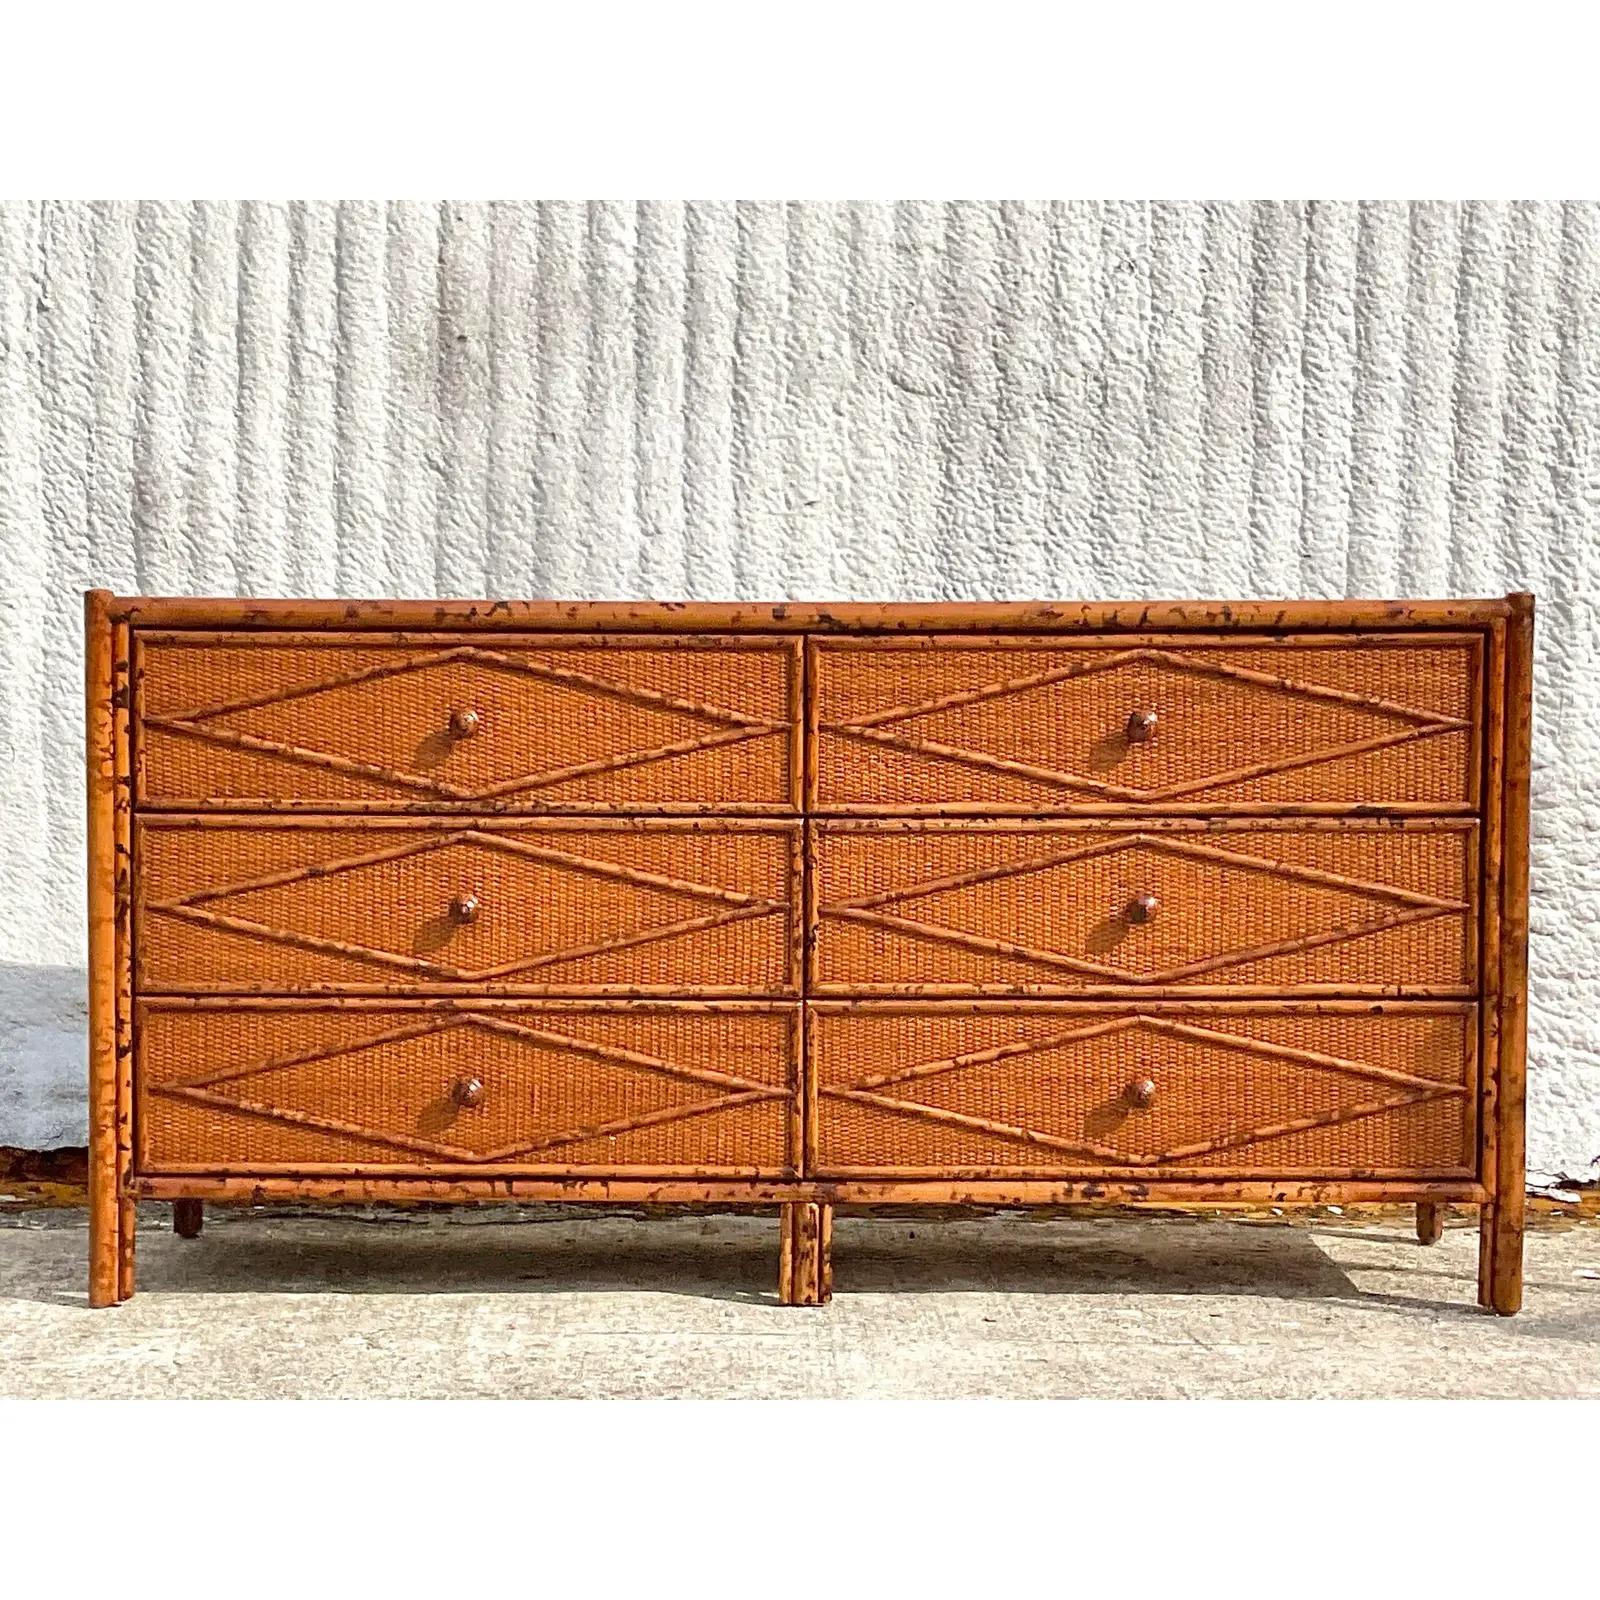 A fantastic vintage Boho six drawer dresser. Beautiful tortoise bamboo with inset woven rattan panels. Made by the iconic Bloomingdale’s group. Acquired from a Palm Beach estate.